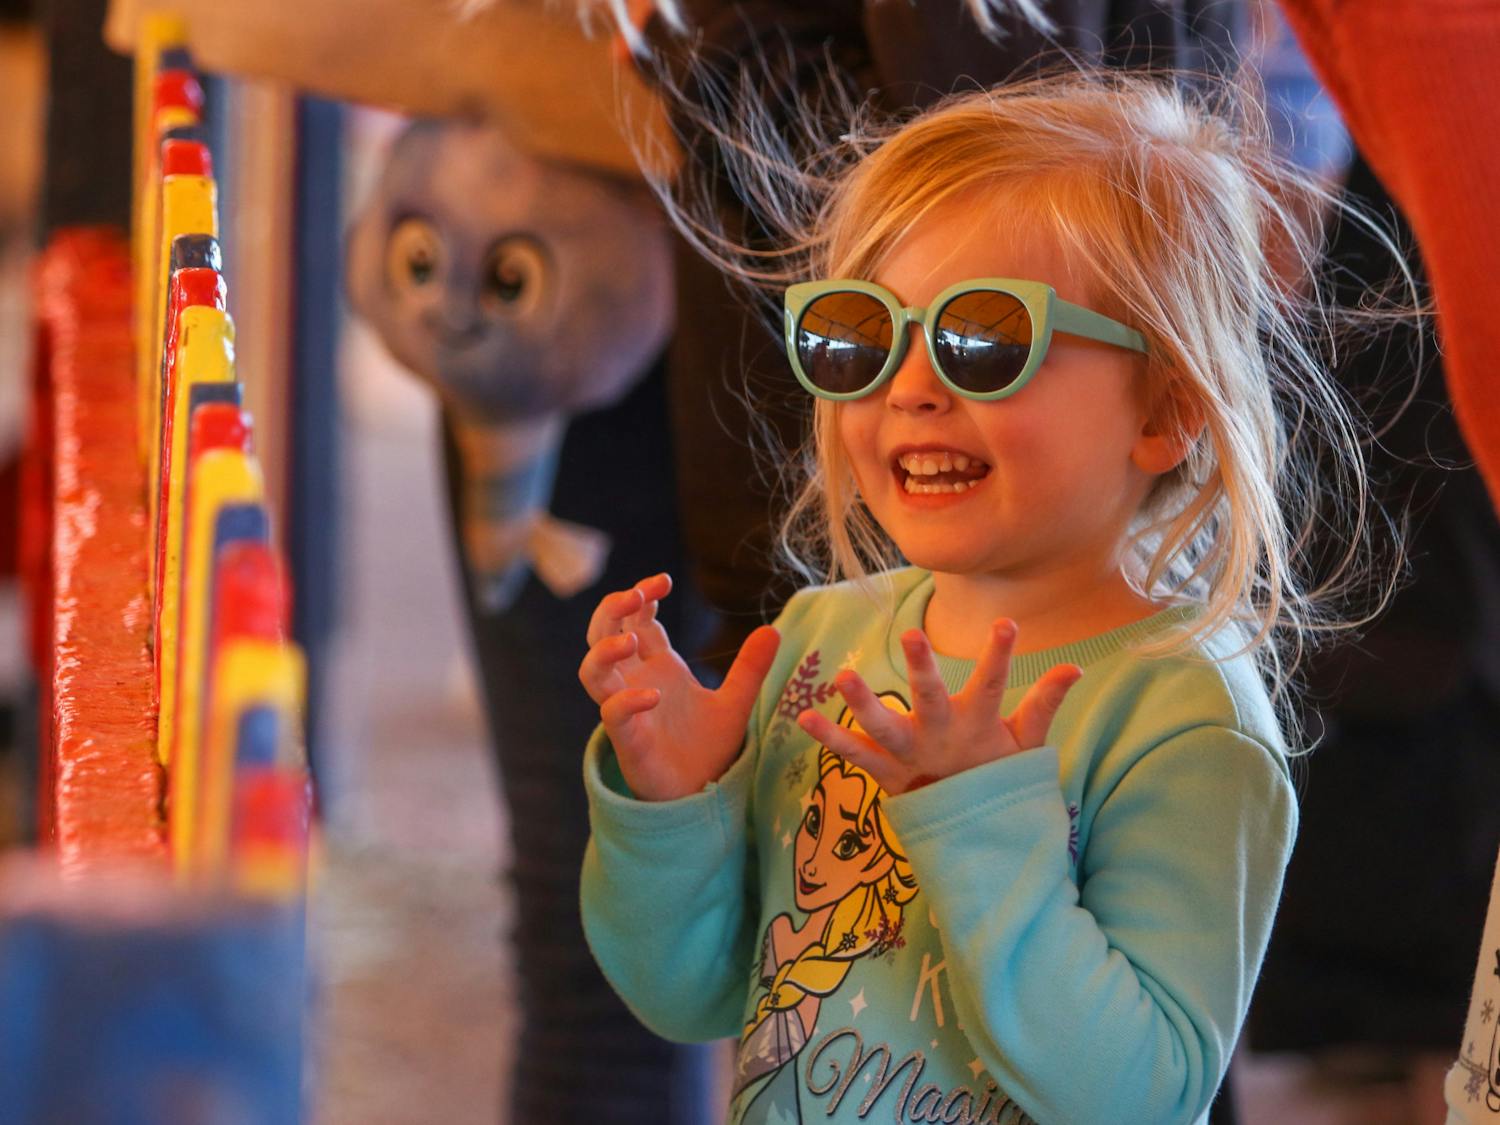 A young girl accompanied by her family enjoys the South Carolina State Fair's petting zoo on Oct. 18, 2022. Over the primary colored fence were animals that brought about excited reactions like hers. 